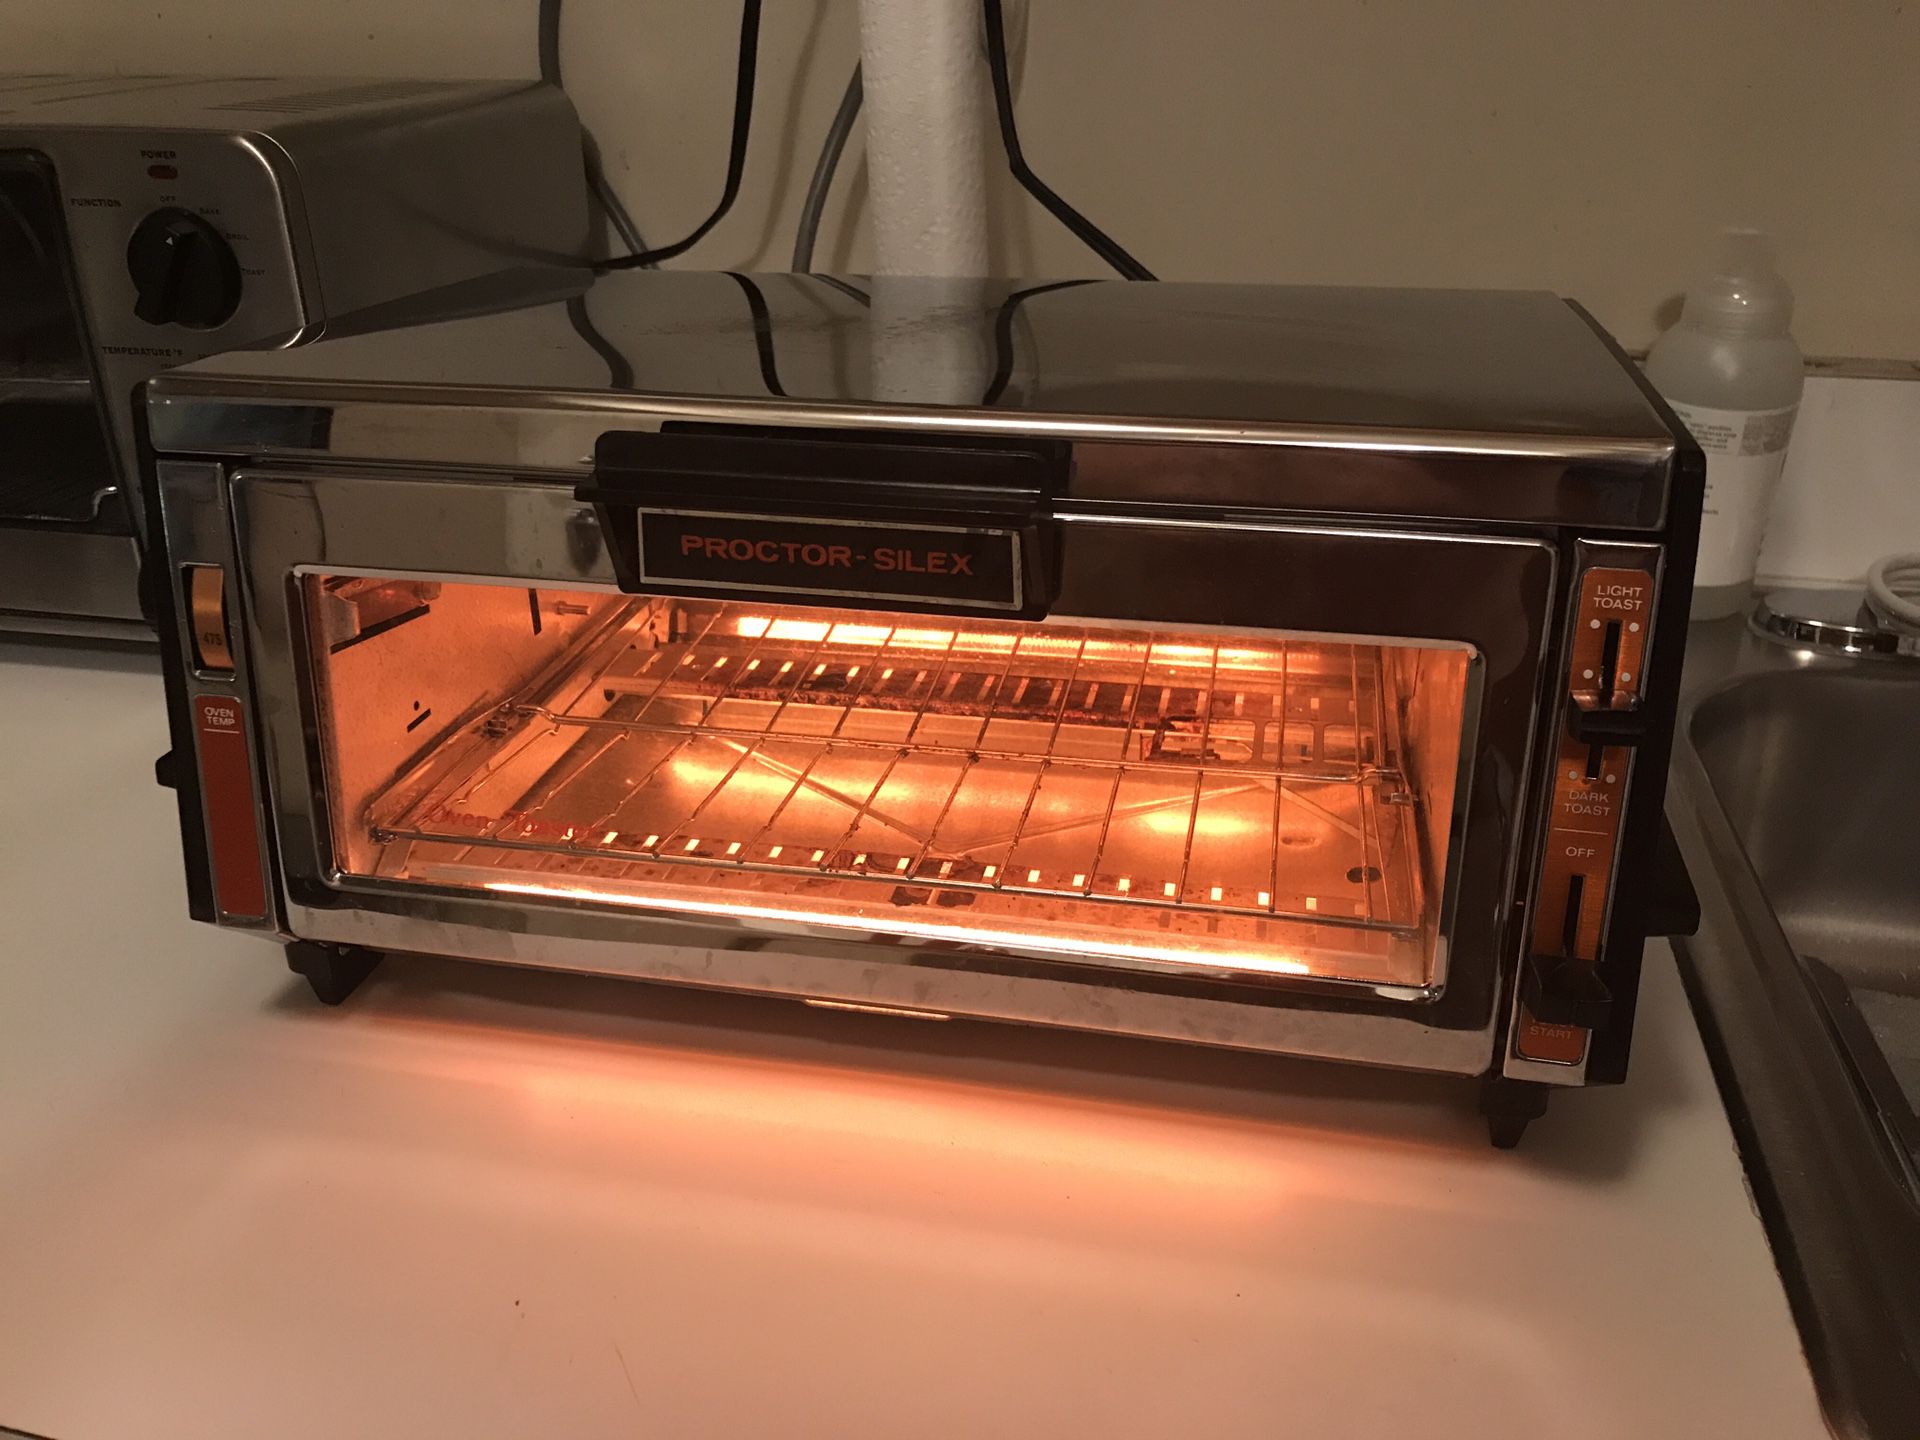 Frigidaire Professional 6-Slice Infrared Convection Toaster Oven, Stainless  Steel for Sale in Queens, NY - OfferUp